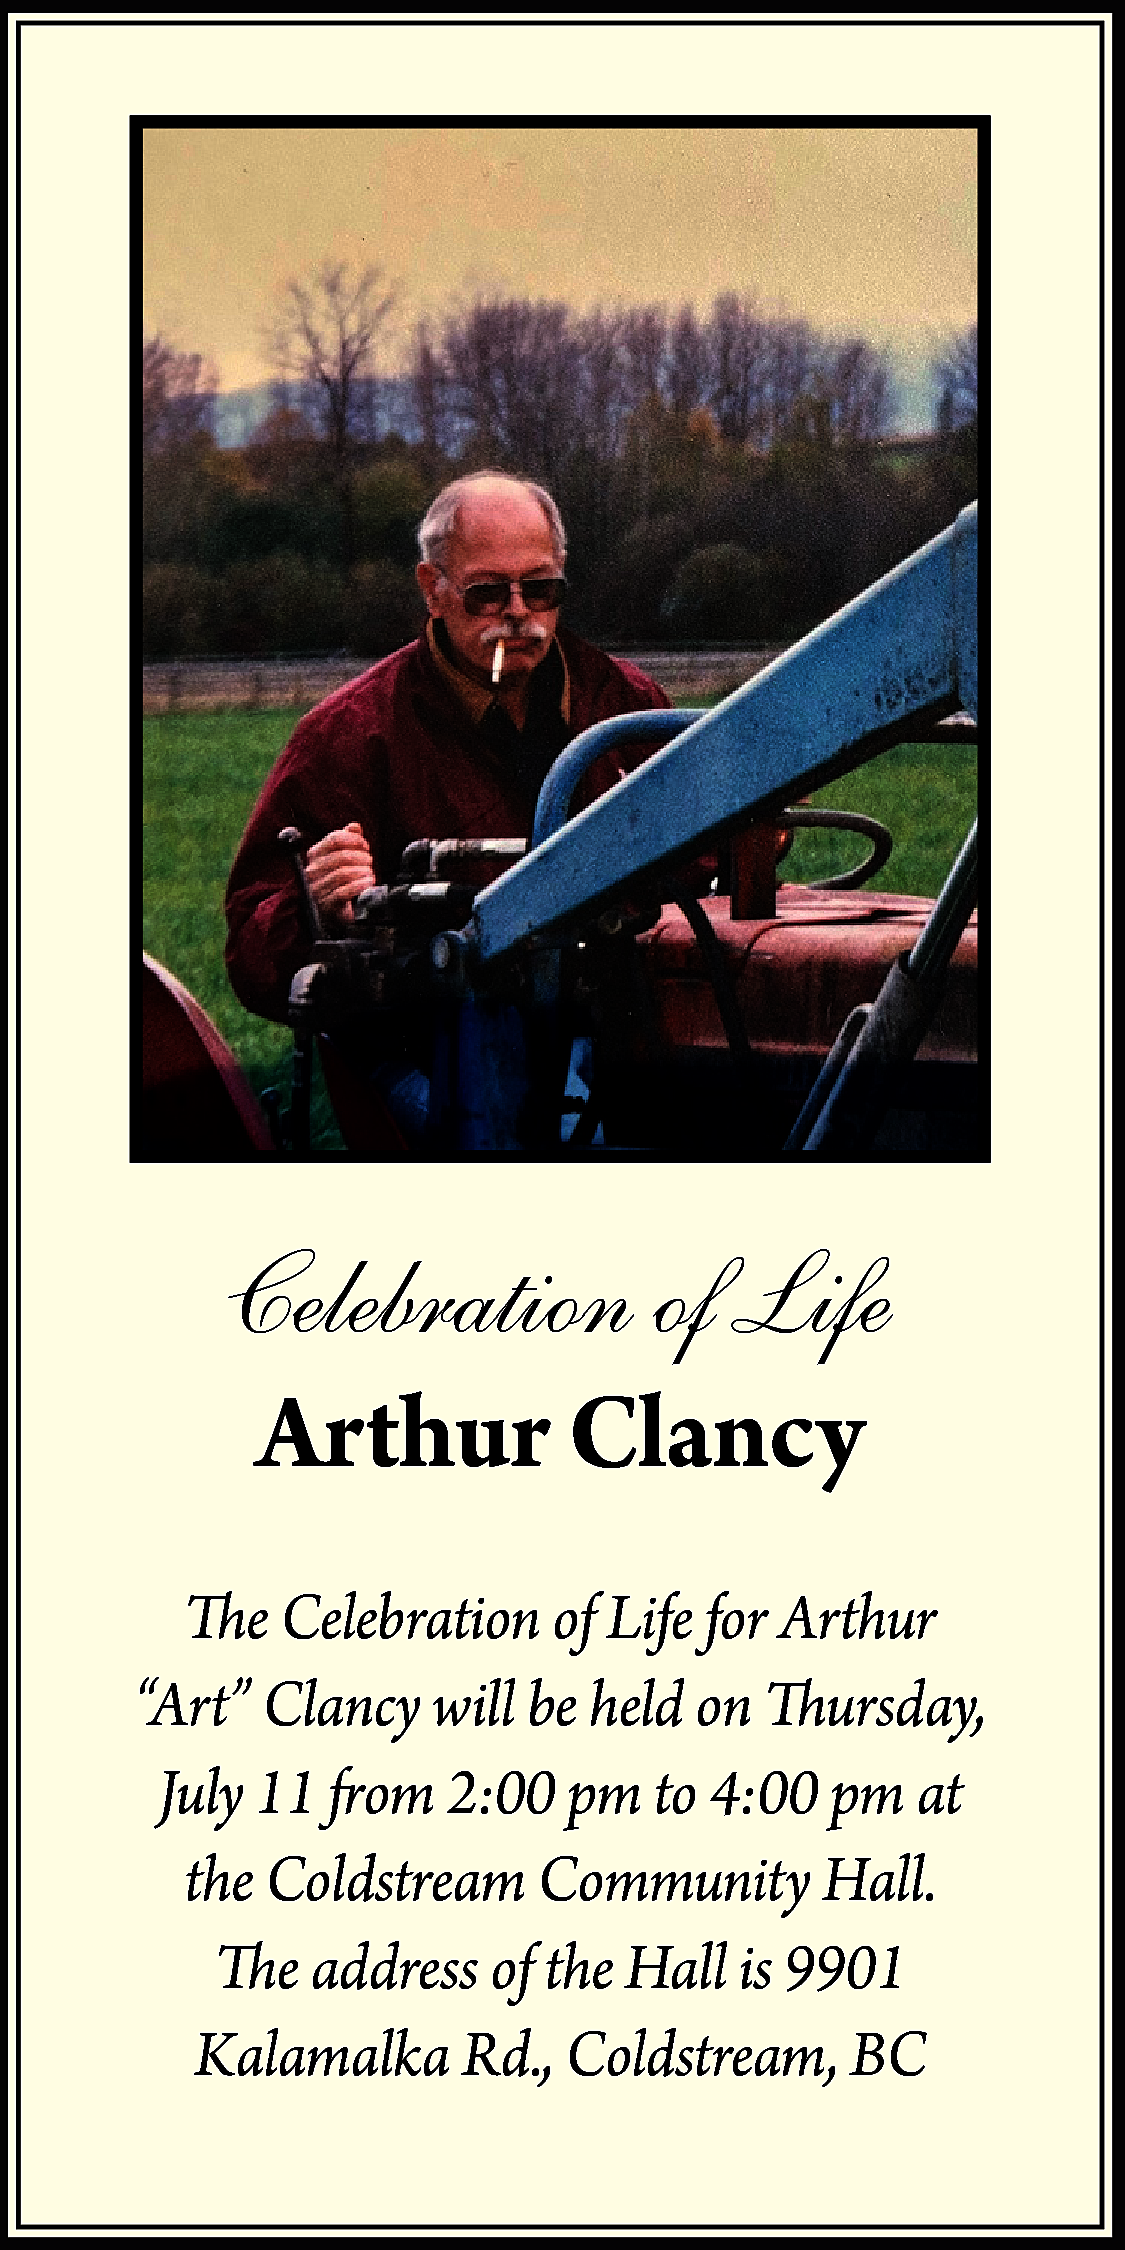 Celebration of Life <br>Arthur Clancy  Celebration of Life  Arthur Clancy    The Celebration of Life for Arthur  “Art” Clancy will be held on Thursday,  July 11 from 2:00 pm to 4:00 pm at  the Coldstream Community Hall.  The address of the Hall is 9901  Kalamalka Rd., Coldstream, BC    